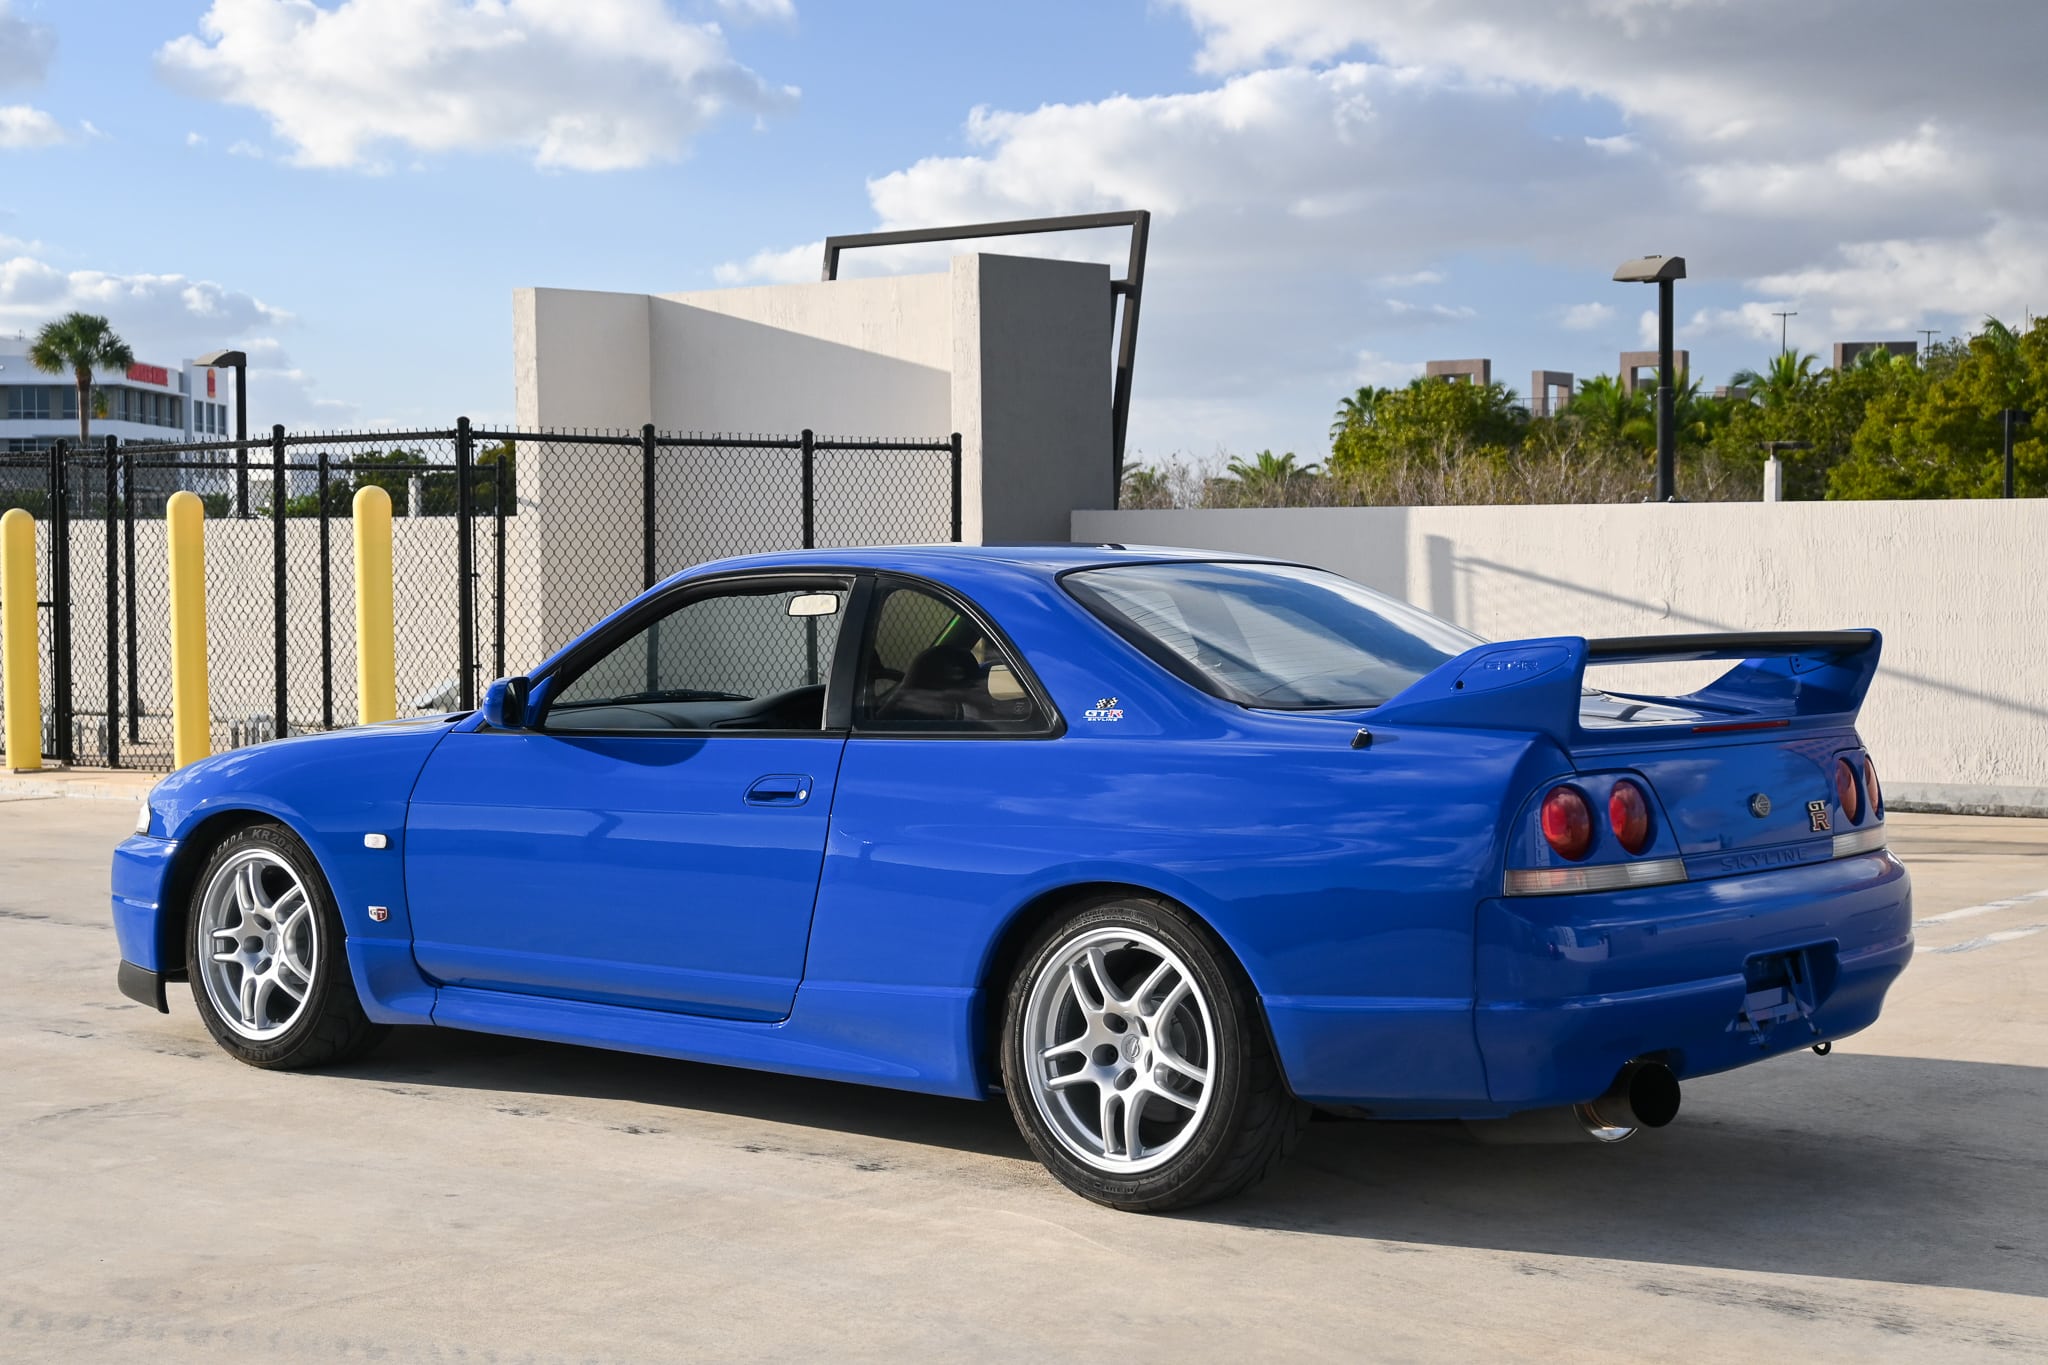 1996 Nissan GT-R R33 LM Limited | 1 of 188 LM Limited | Rare BT2 Championship Blue | Lightly Tuned | HKS